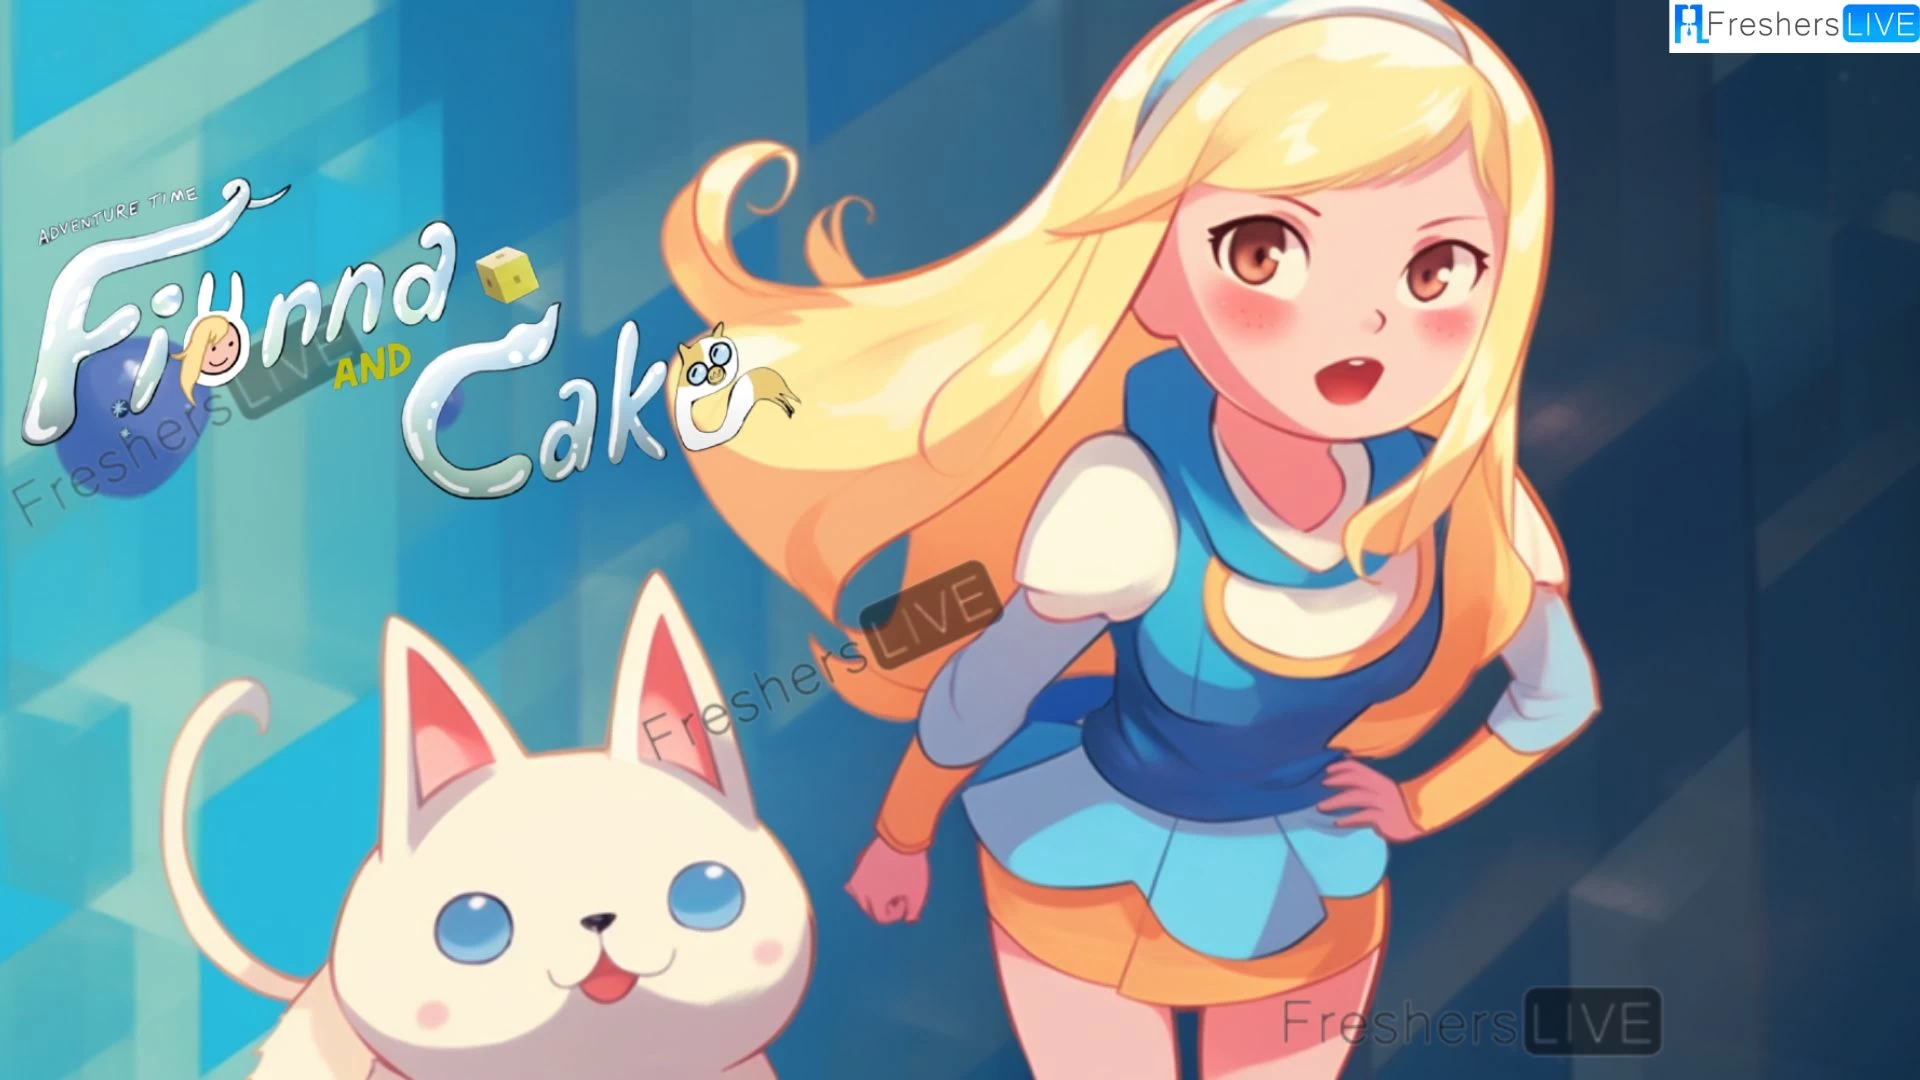 Will There Be a Season 2 Of Fionna and Cake? Adventure Time Fionna and Cake Season 2 Release Date